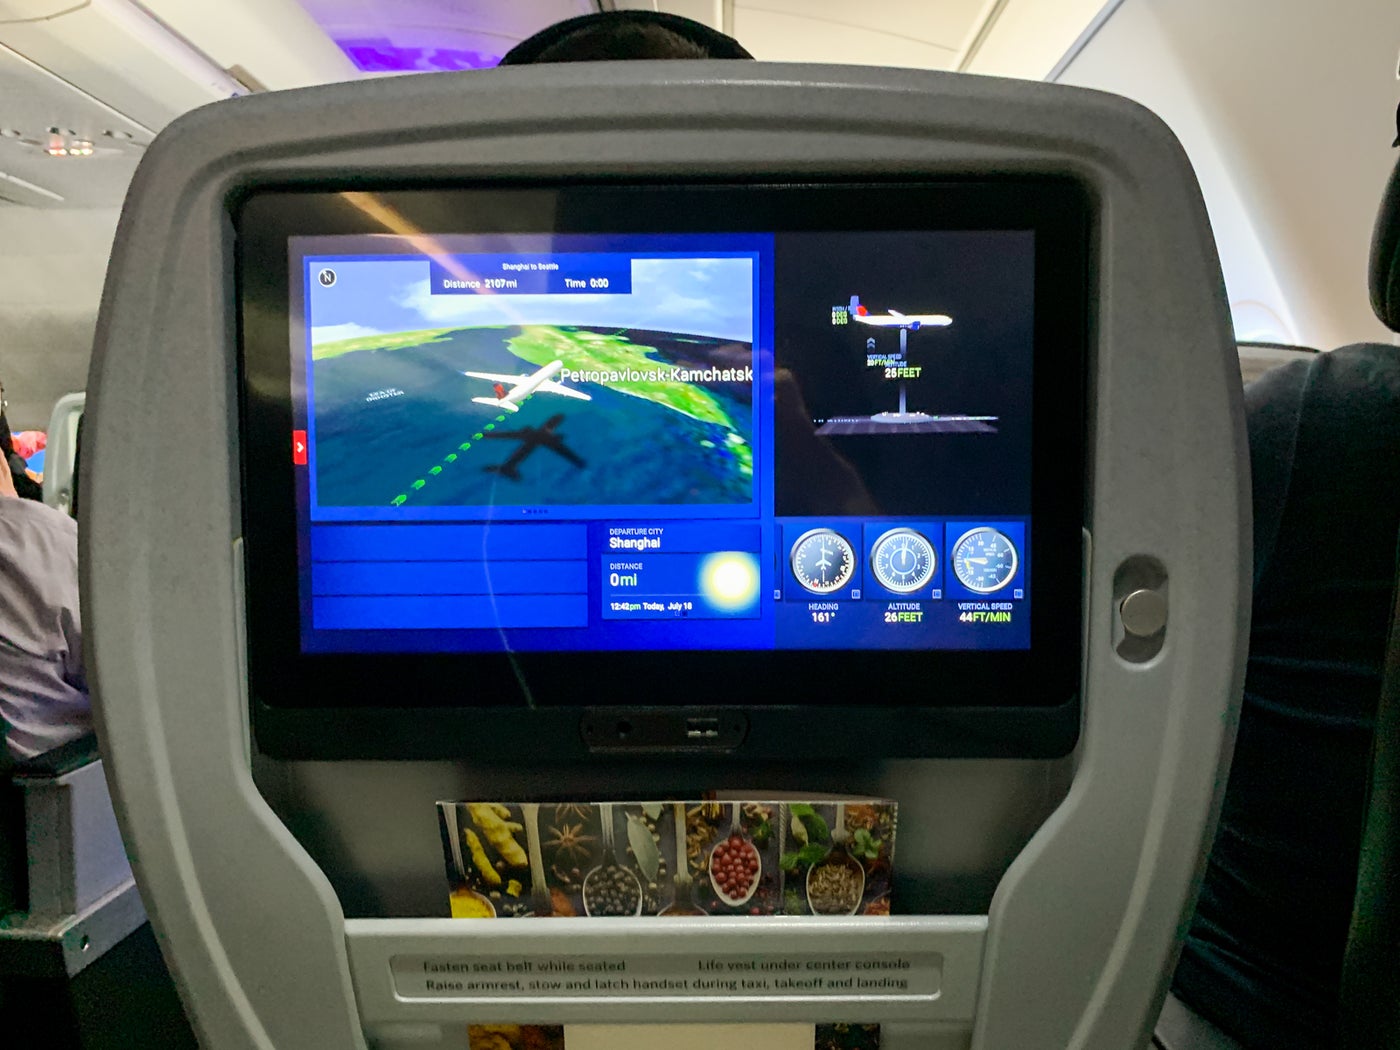 Delta Premium Select Review On The Brand New A330 900neo